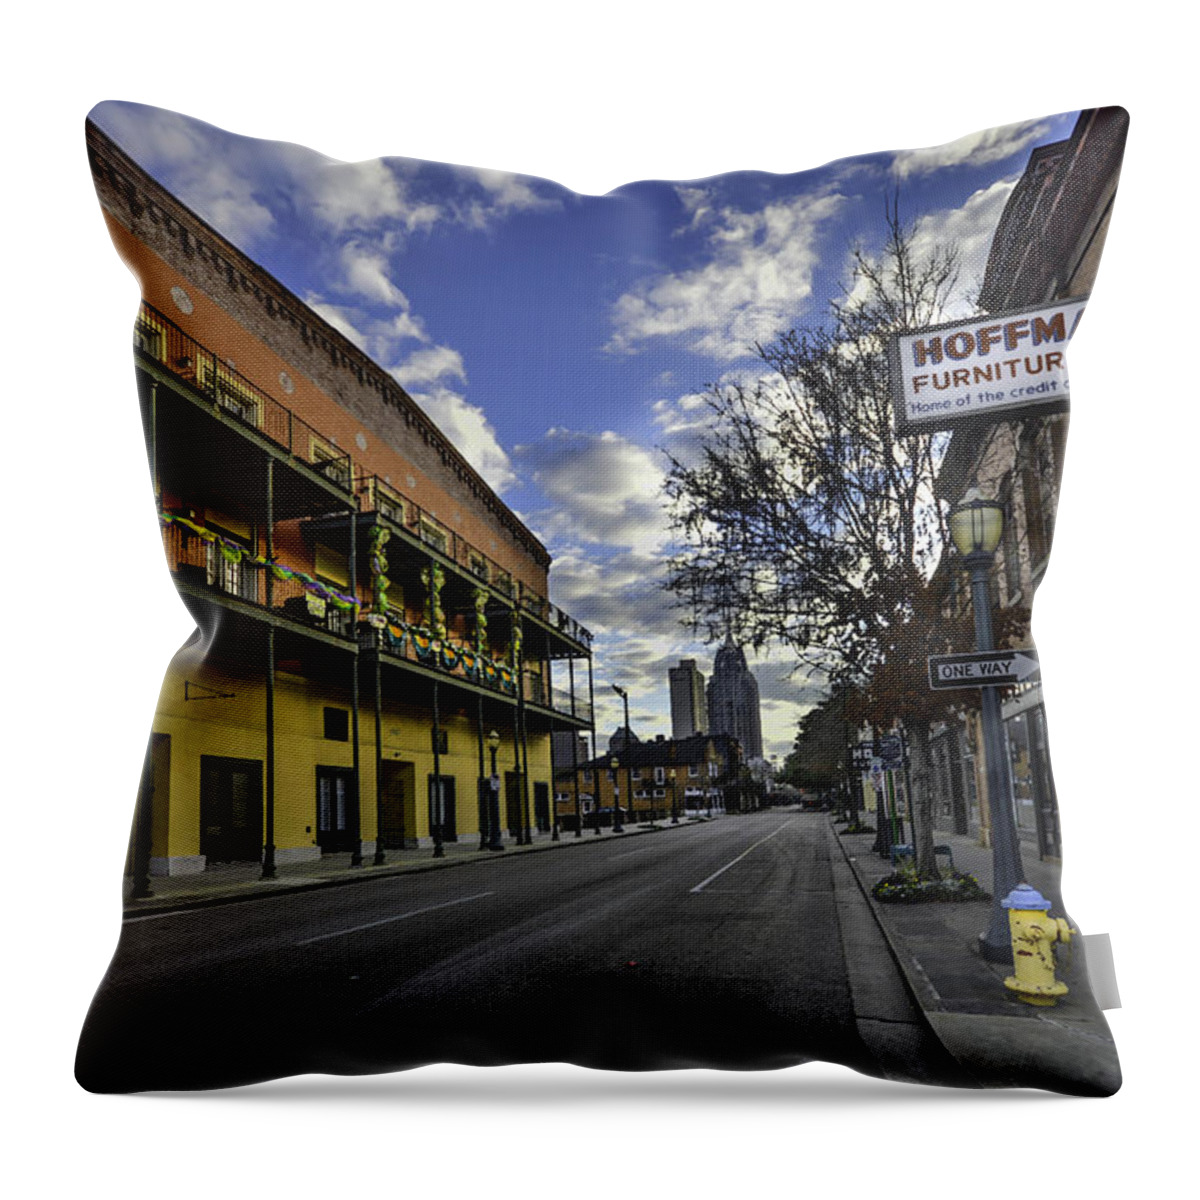 Alabama Throw Pillow featuring the digital art Mattress and Hoffmans by Michael Thomas